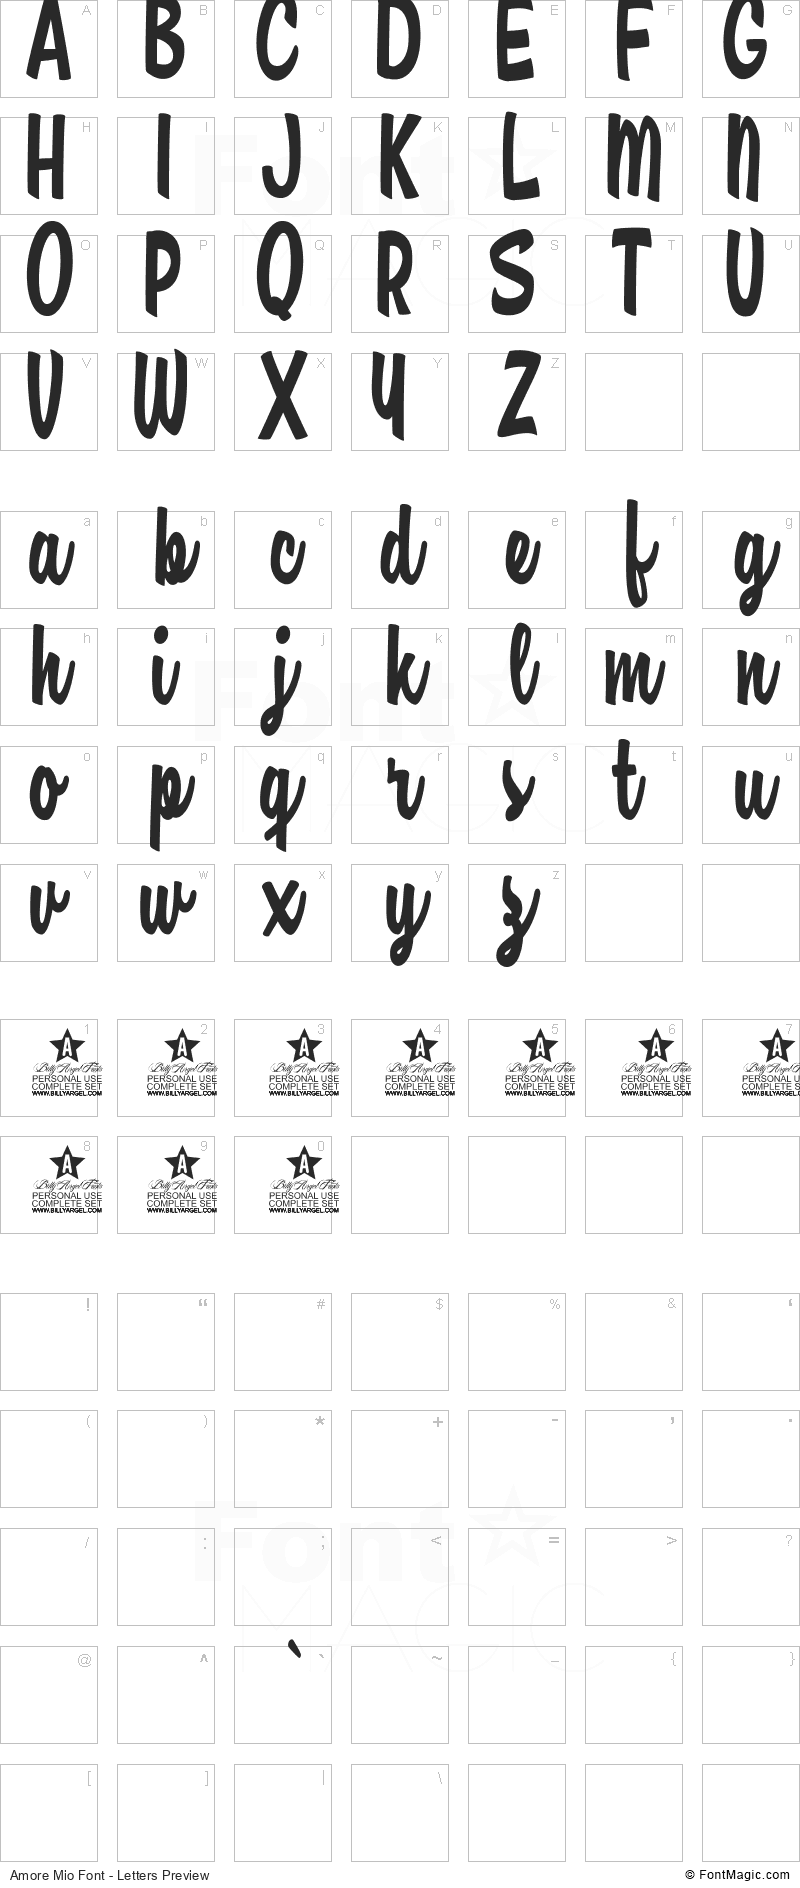 Amore Mio Font - All Latters Preview Chart